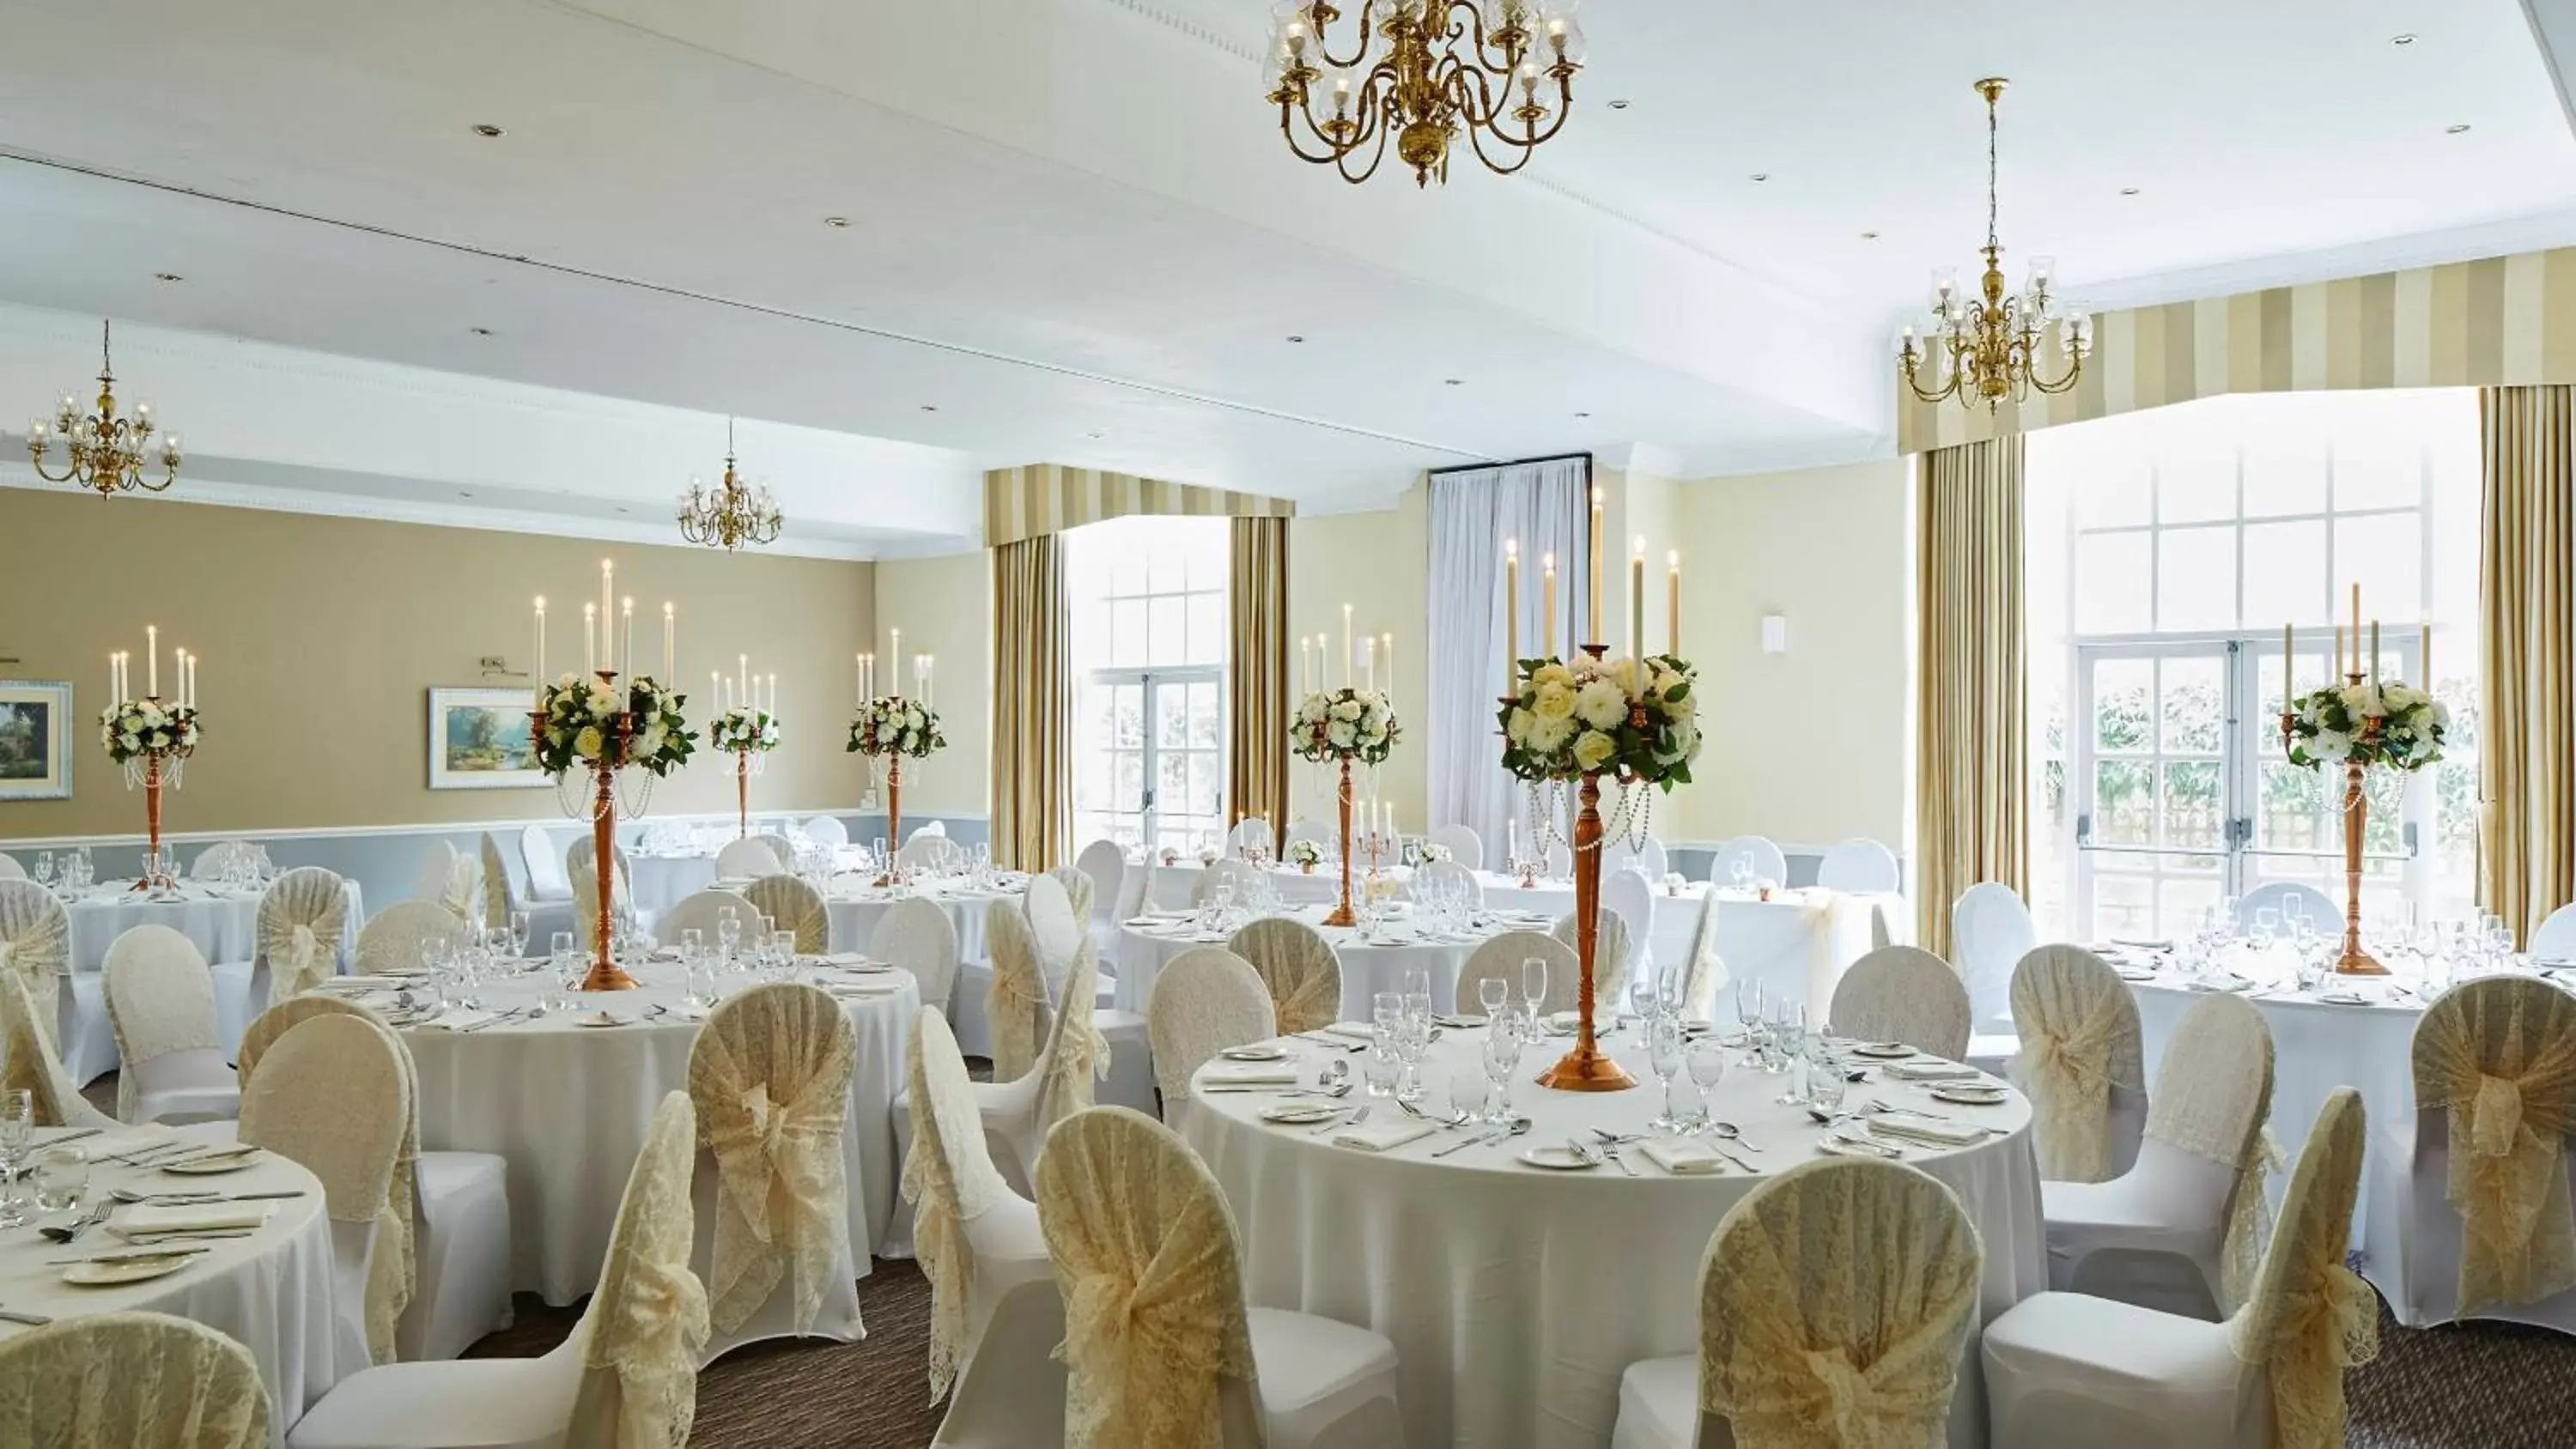 Banquet/Function facilities, Banquet Facilities in Hollins Hall Hotel, Golf & Country Club